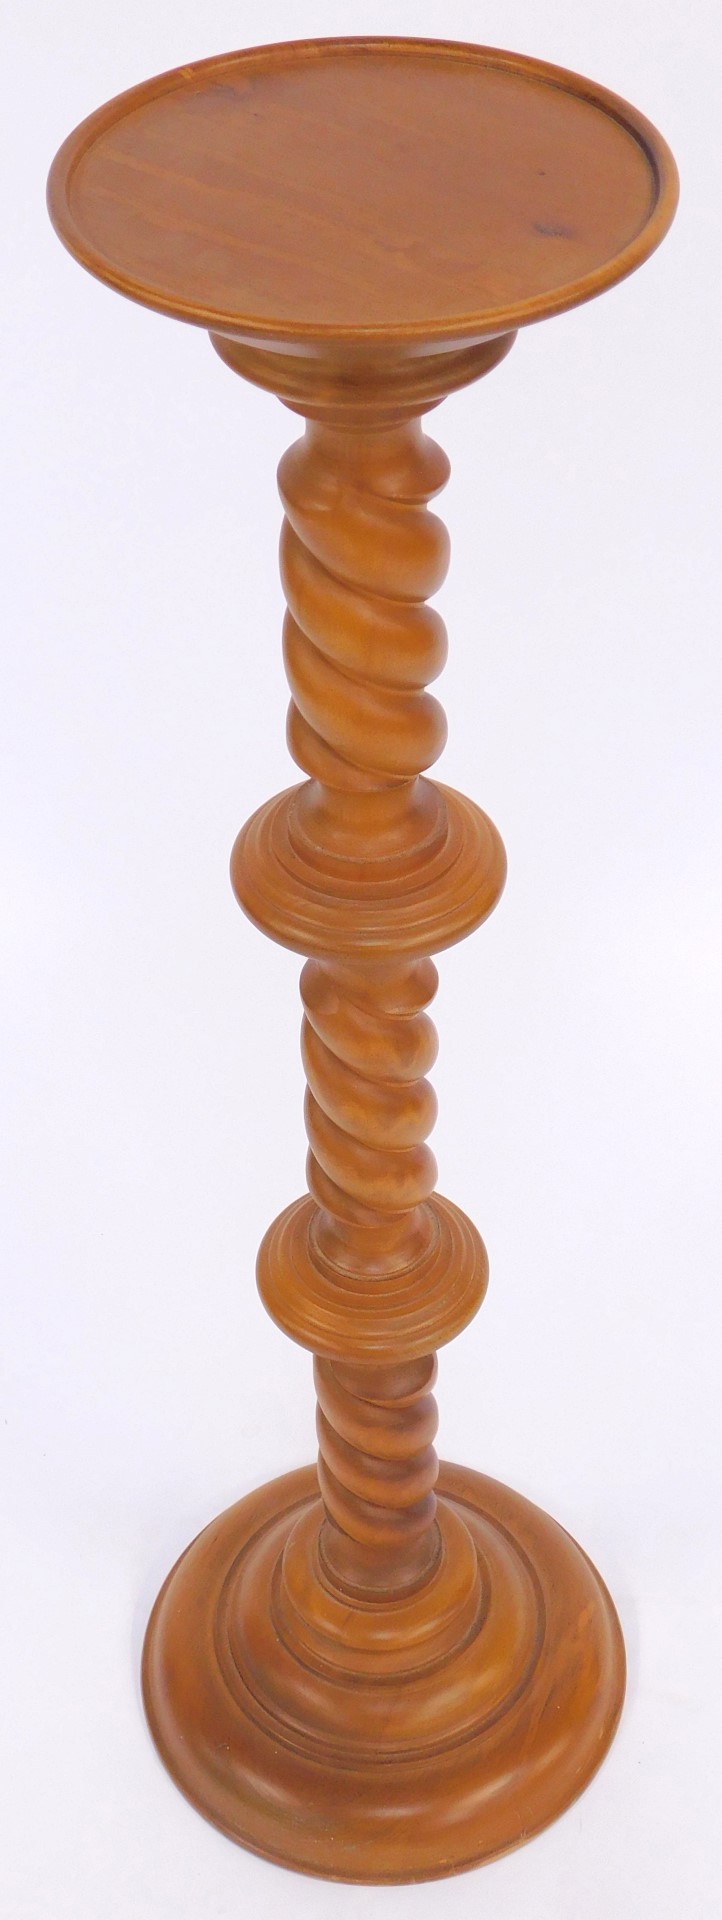 A 20thC hardwood jardiniere stand, the circular top raised on a three part turned column, on a circu - Image 2 of 2